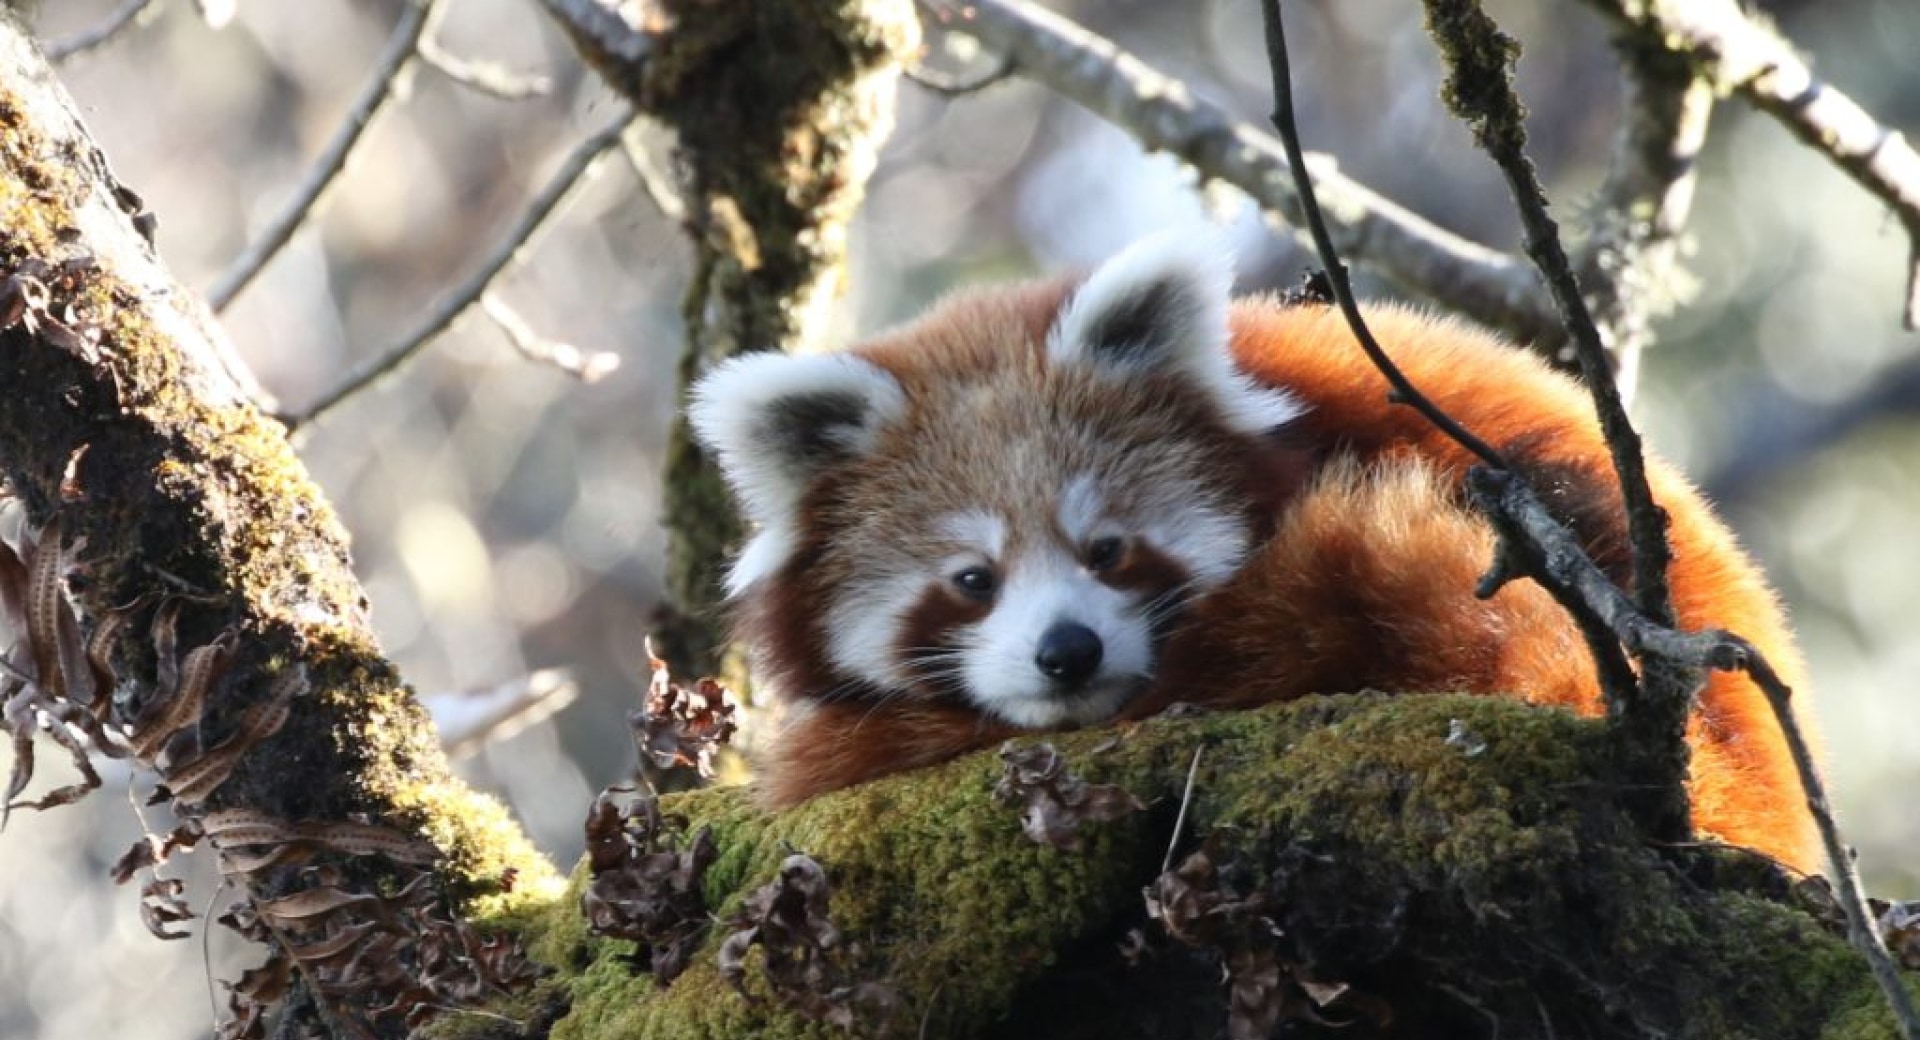 Press Release: Ten Red Pandas Collared in Nepal For Groundbreaking Study